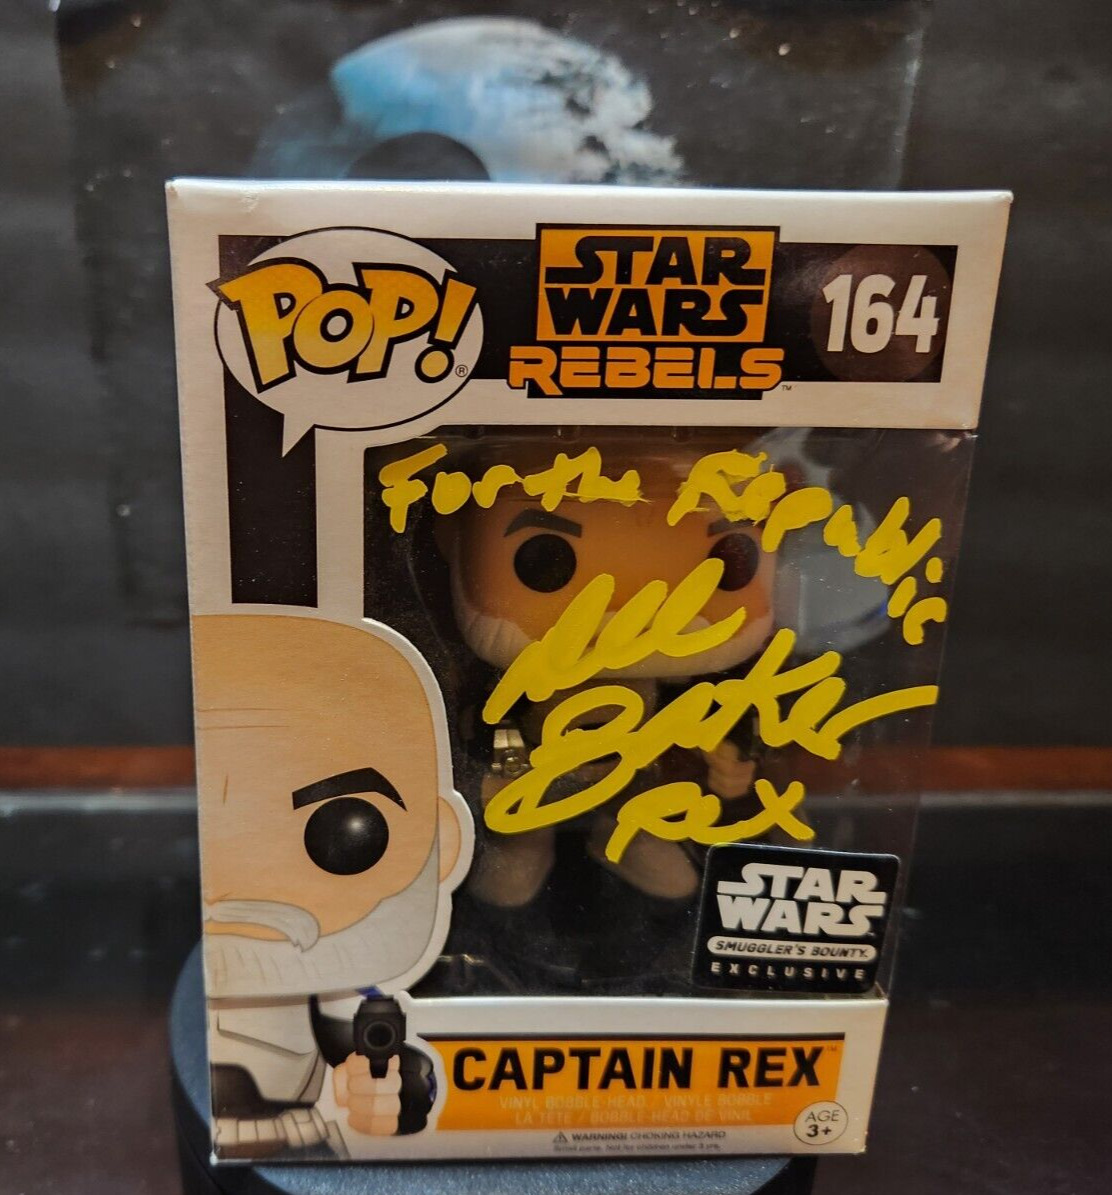 STAR WARS REBELS CAPTAIN REX  SIGNED BY DEE BAKER WITH QUOTE  w/ JSA FUNKO POP